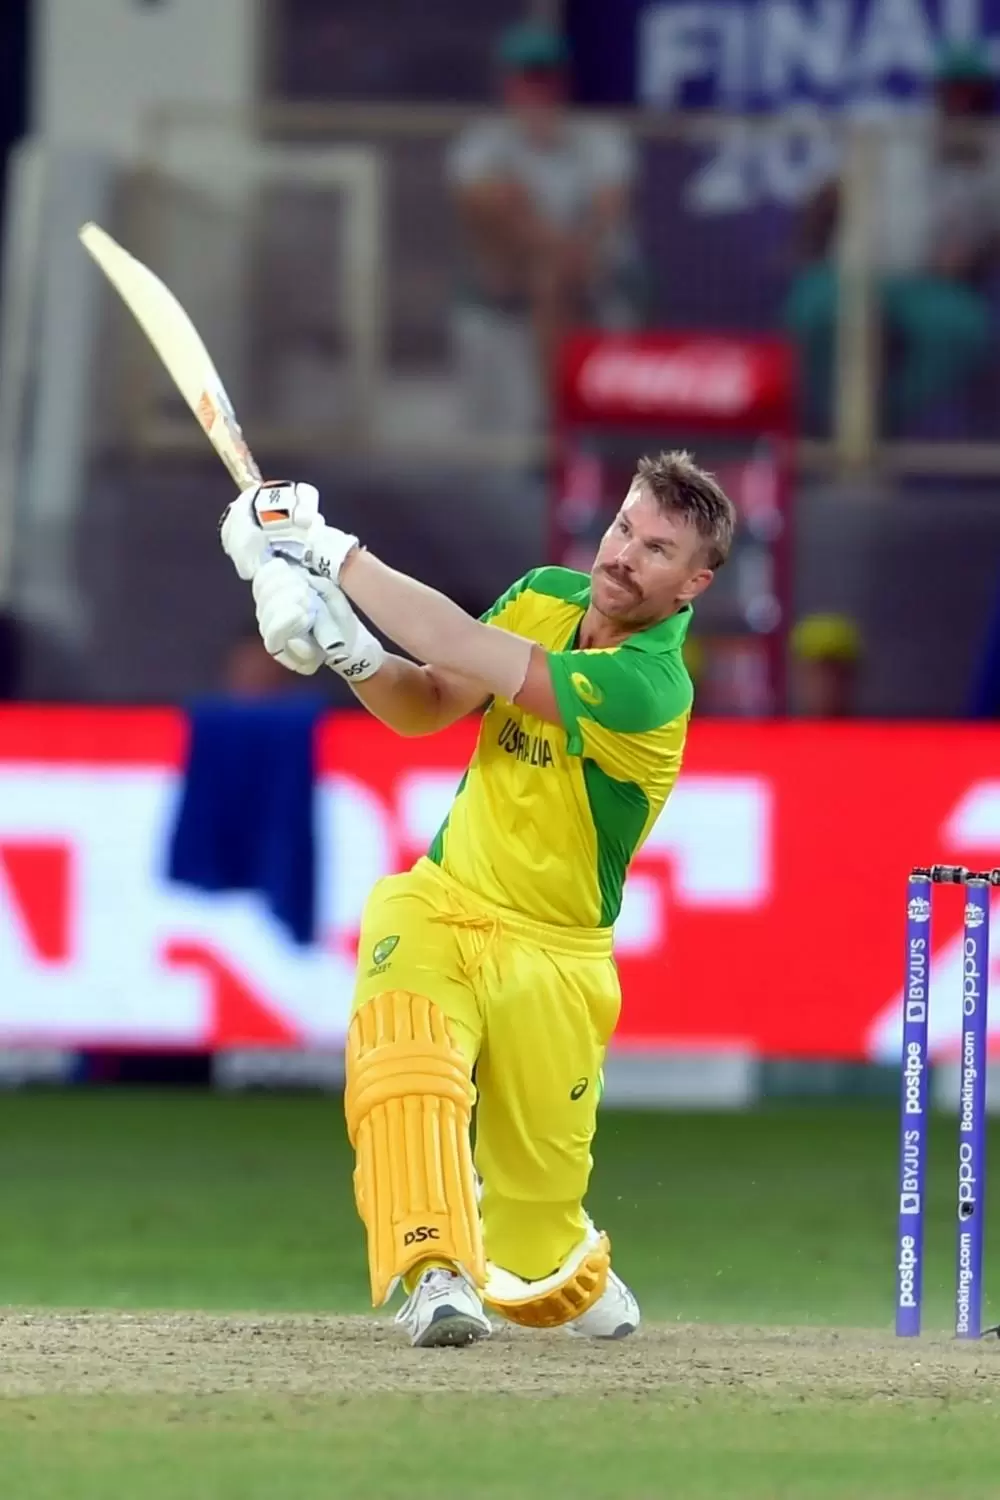 The Weekend Leader - Lessons from David Warner's Success at T20 World Cup